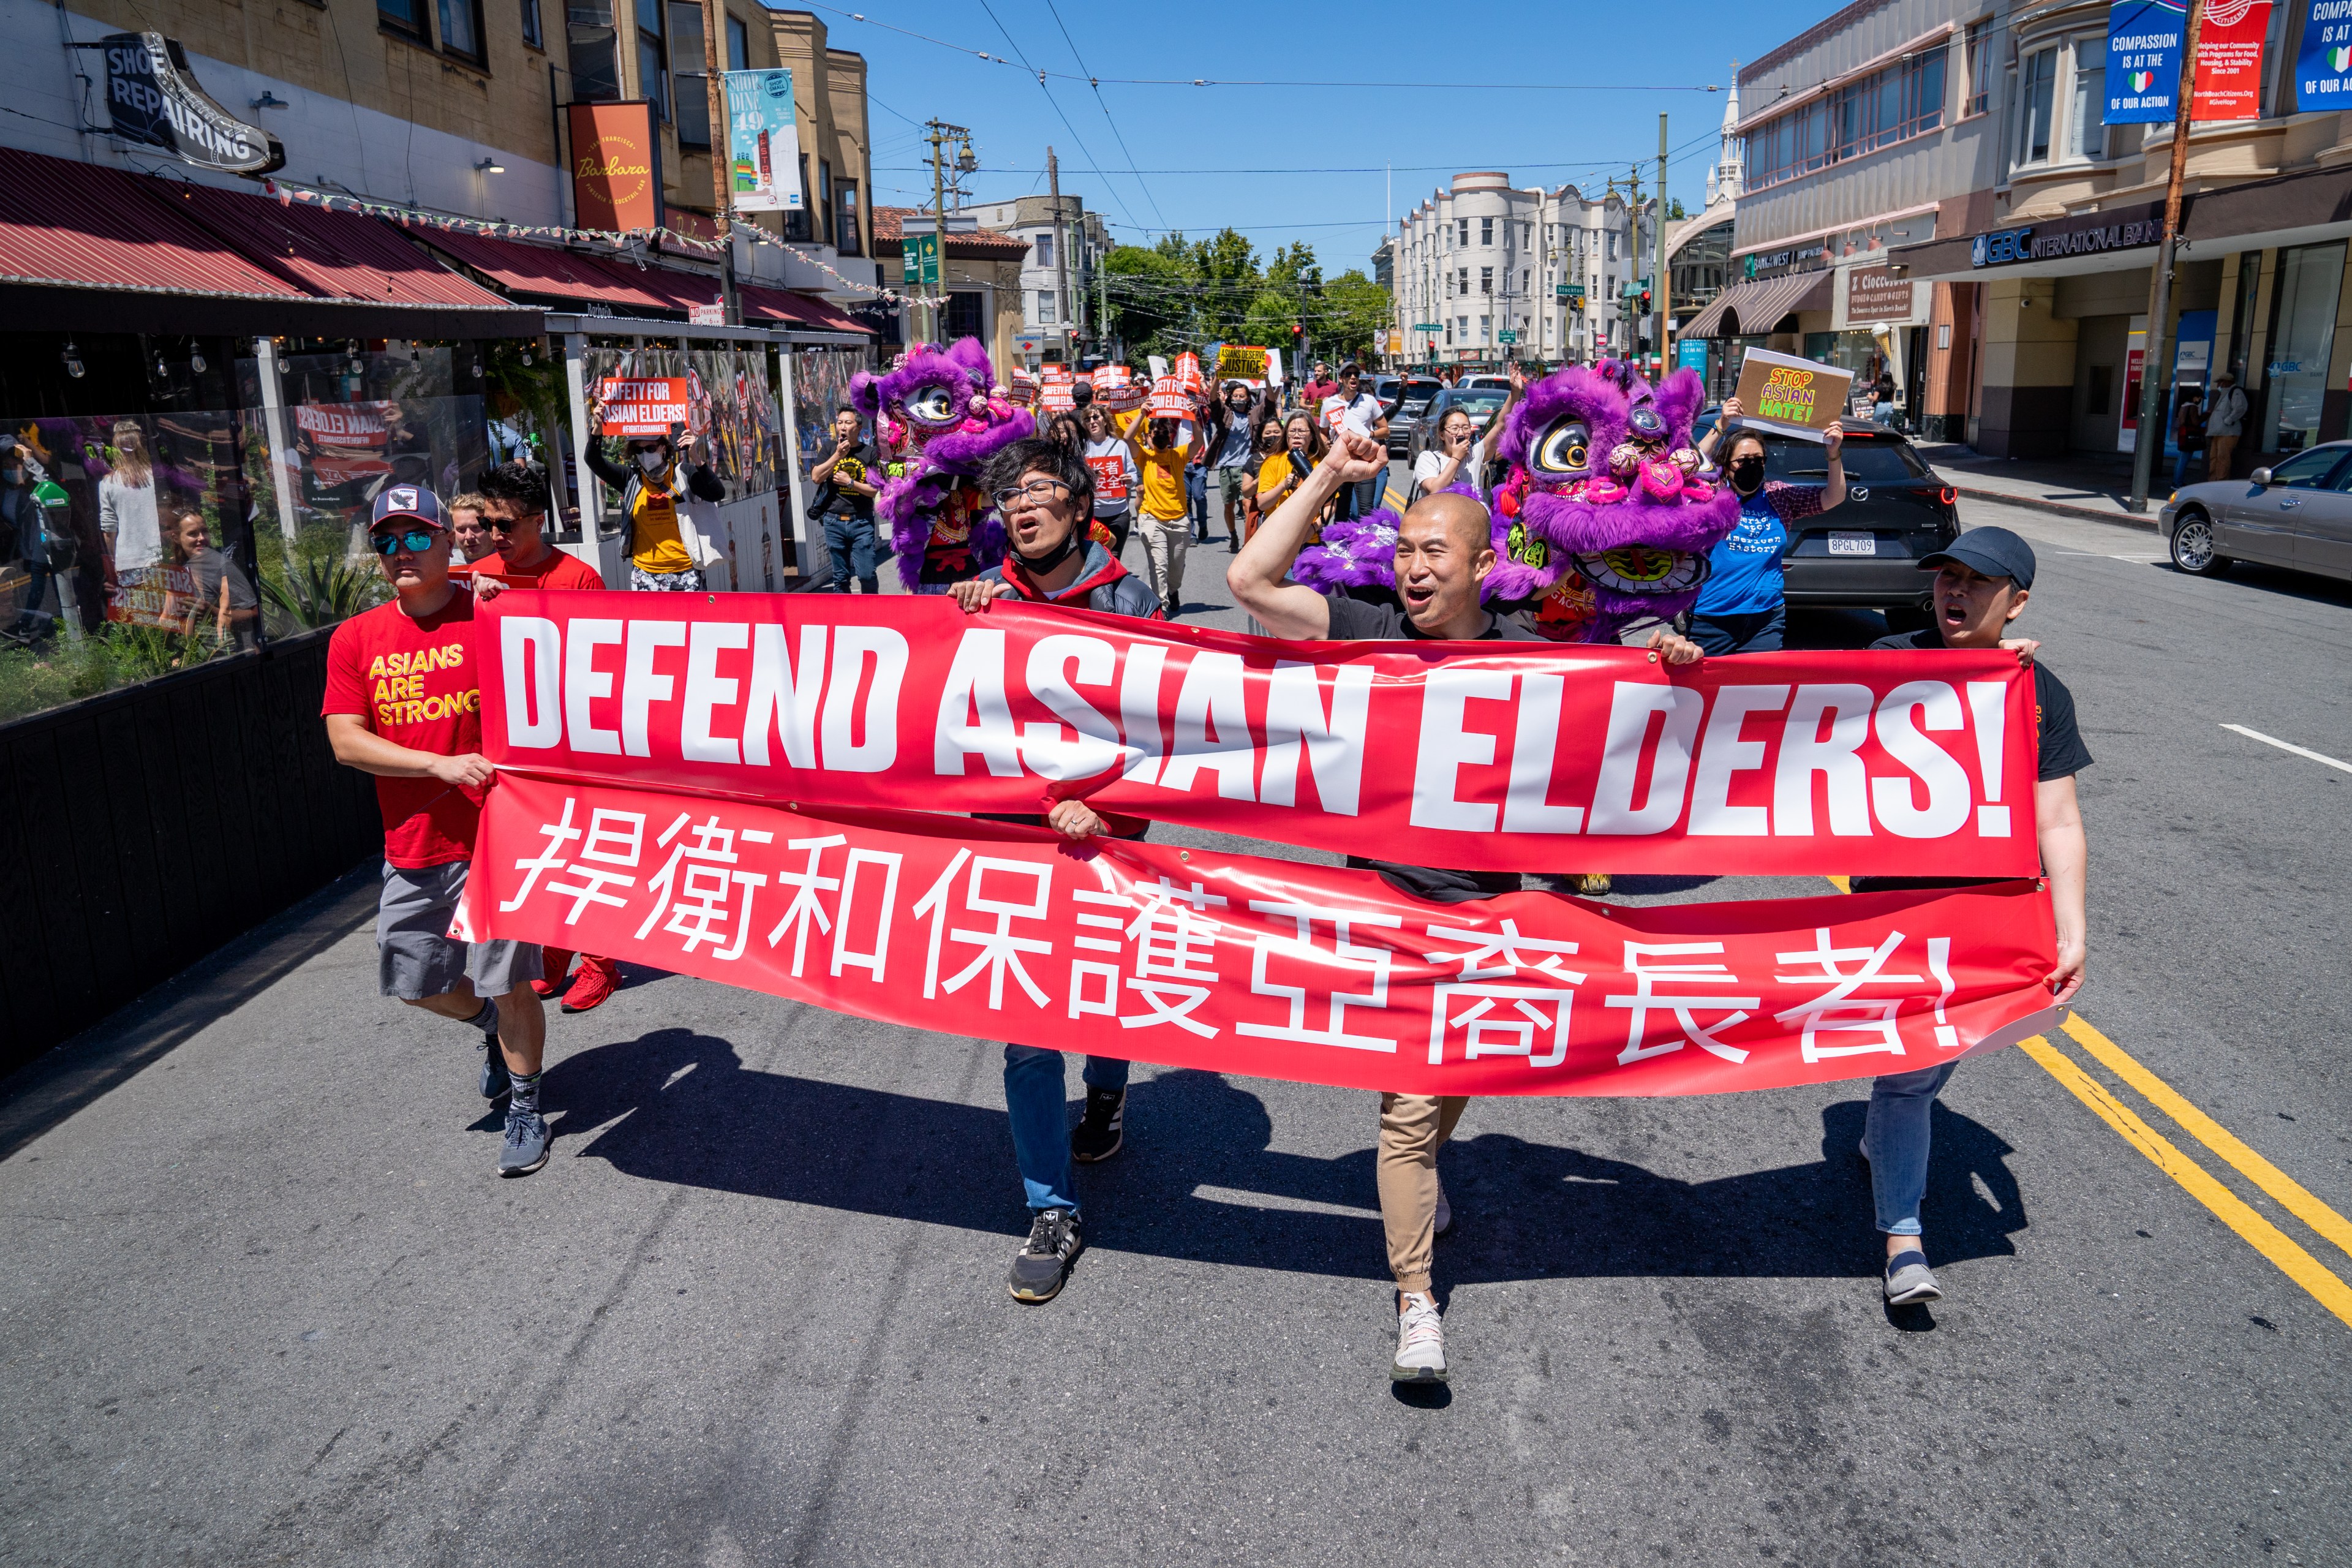 A group marches with a banner reading &quot;DEFEND ASIAN ELDERS!&quot; in both English and Chinese.